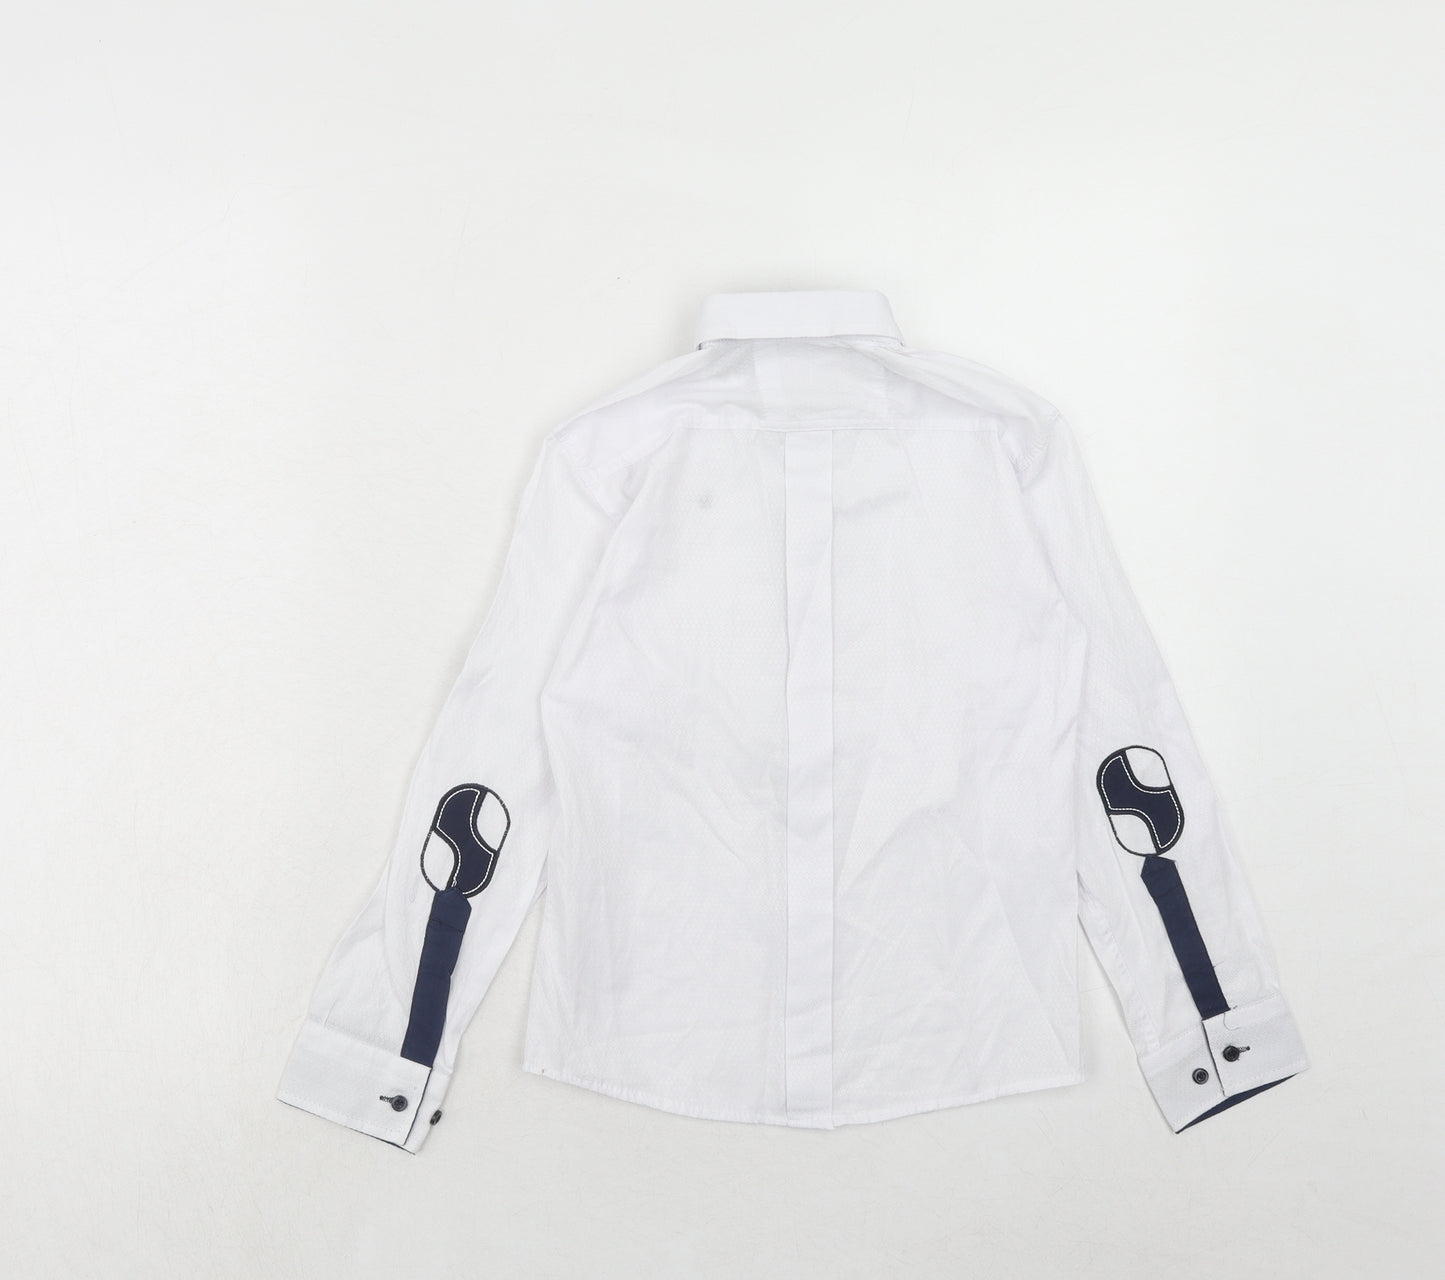 Lisami Junior Boys White Cotton Basic Button-Up Size 8 Years Collared Button